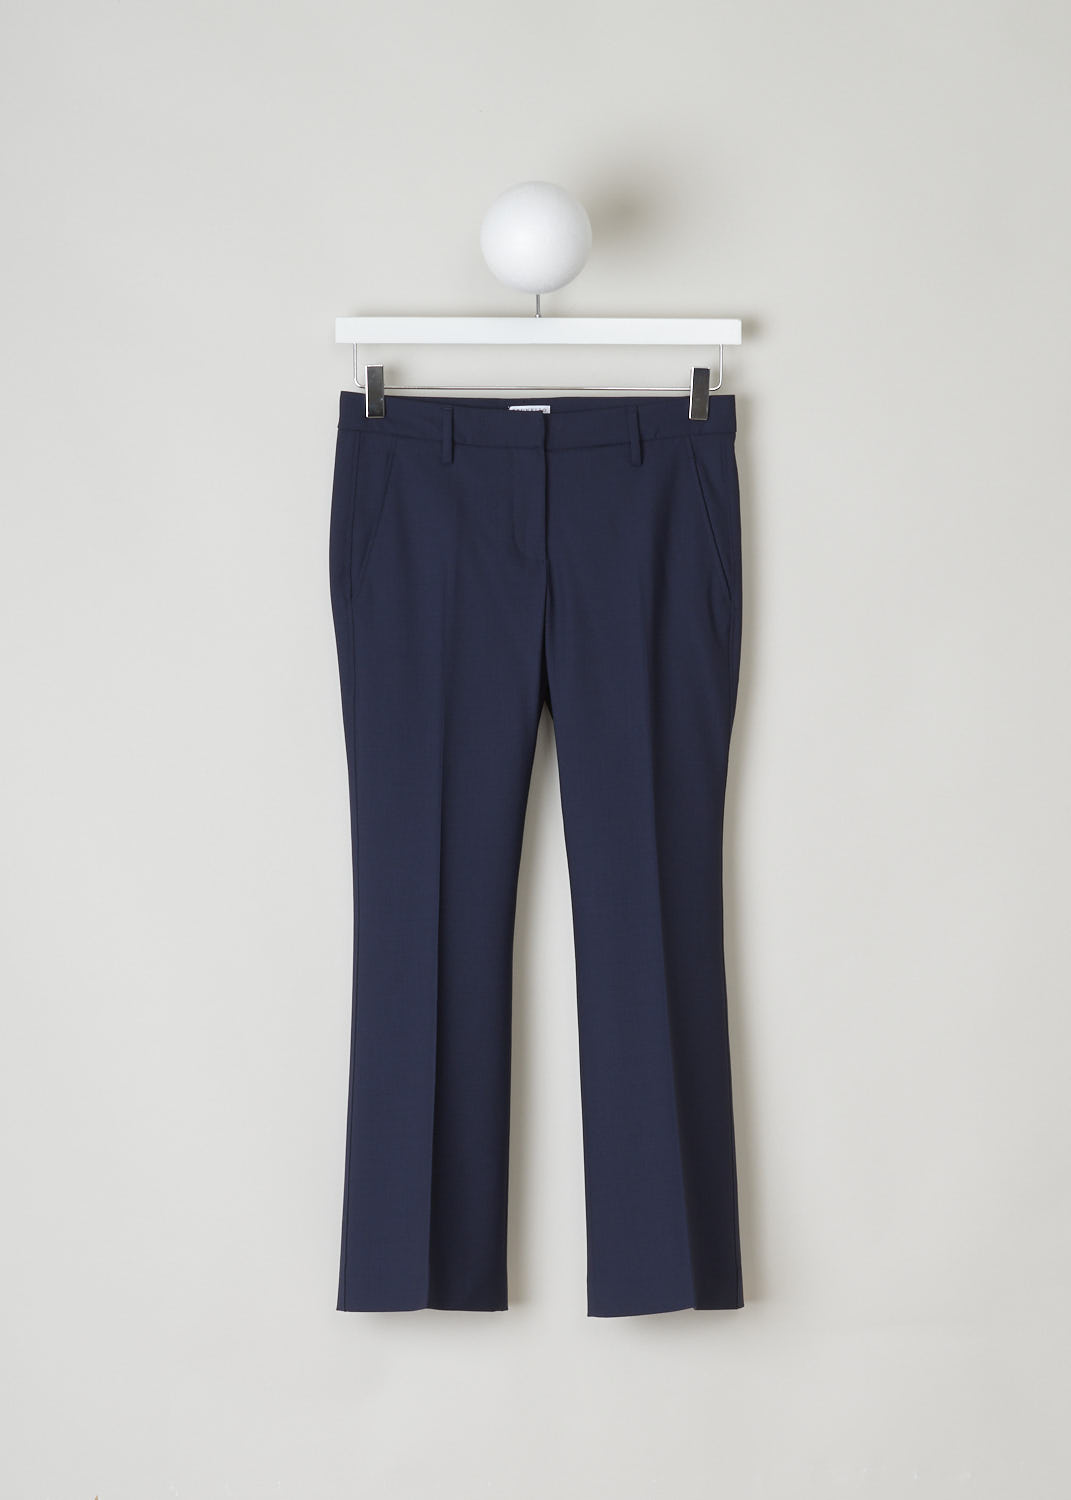 BRUNELLO CUCINELLI, NAVY BLUE STRAIGHT LEG TROUSERS, M0W07P1951_C2831, Blue, Front, Navy blue pants, featuring a flat front model. This low-cut model has a cropped length, slanted pockets in the front and two welt pockets in the back. Fastening option on this model is a zipper, a metal clip and a backing button. 
